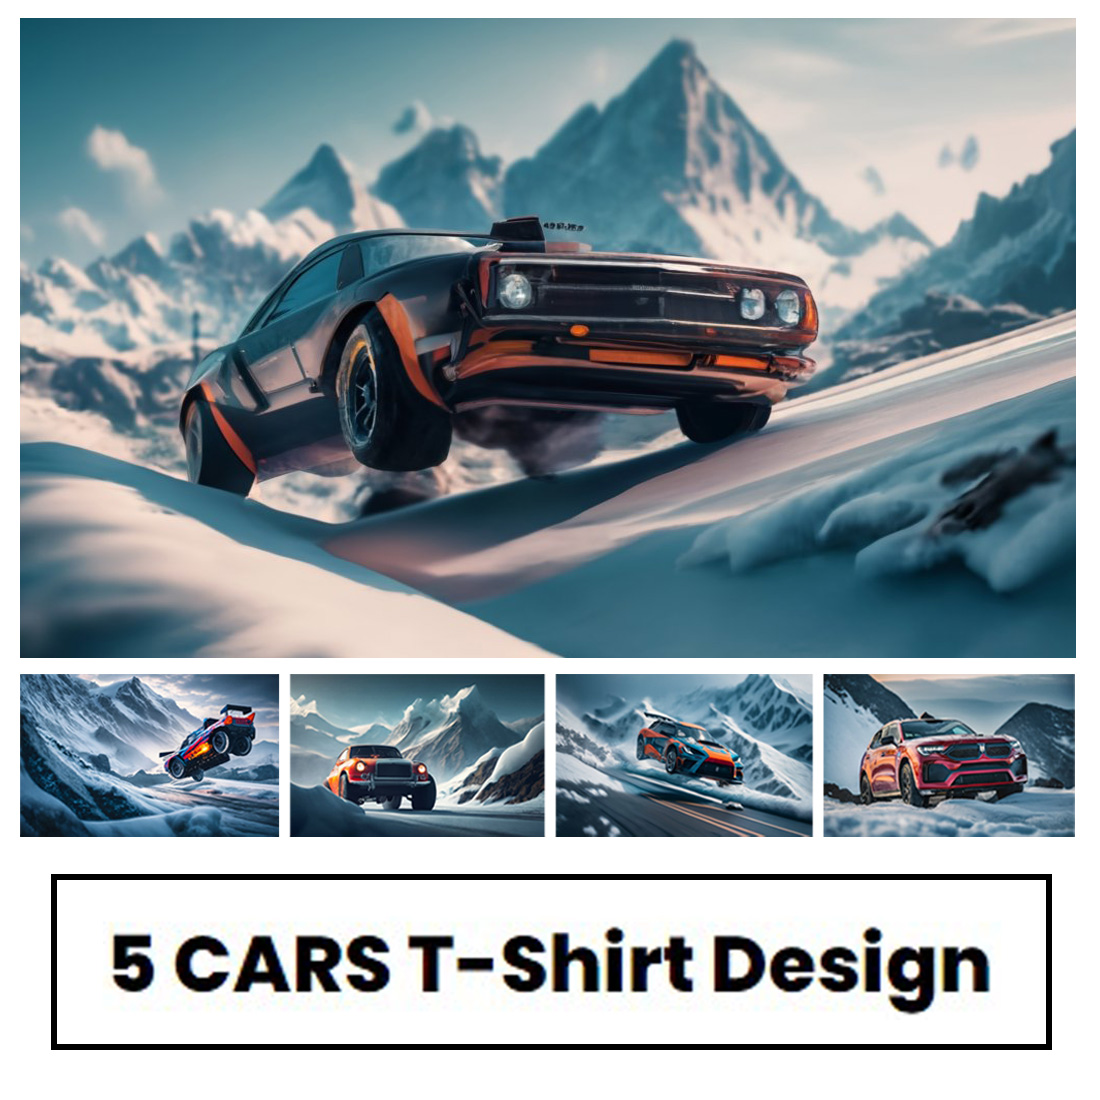 5 Racing Cars T-Shirt Designs Bundle JPG Collections cover image.